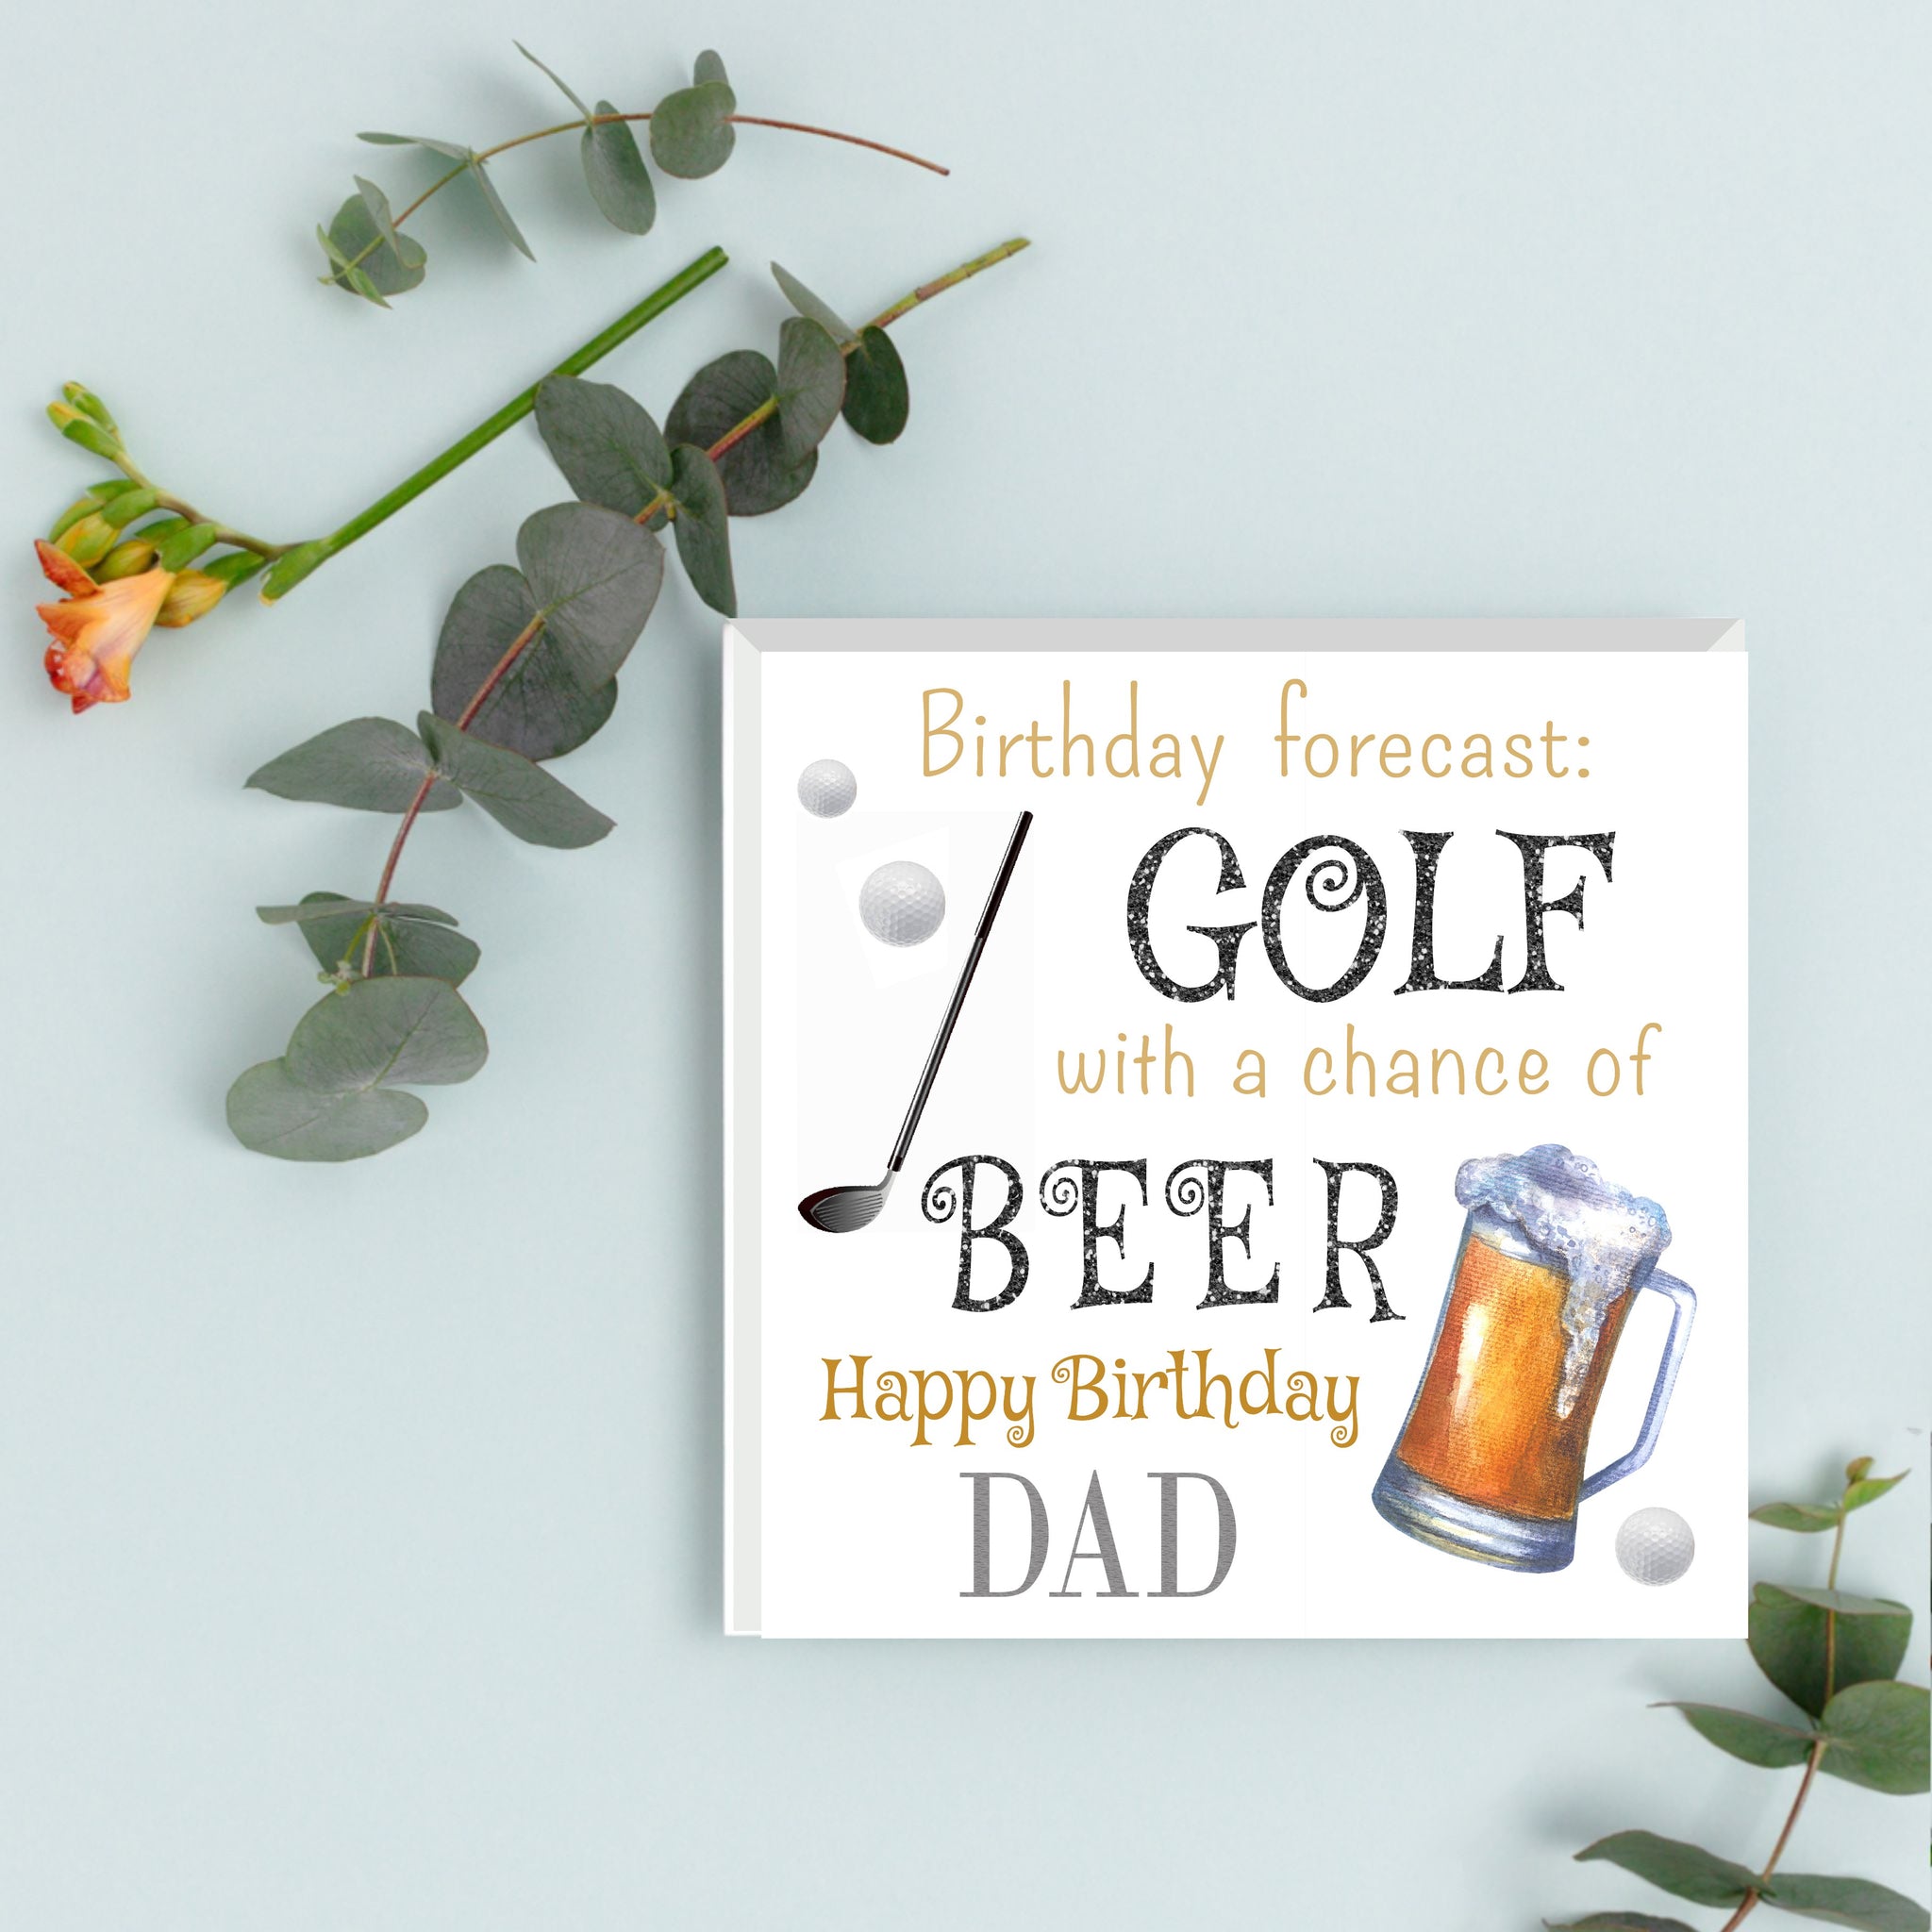 Happy Birthday Dad | Golf and Beer Inspired | Happy Birthday | Greeting Card